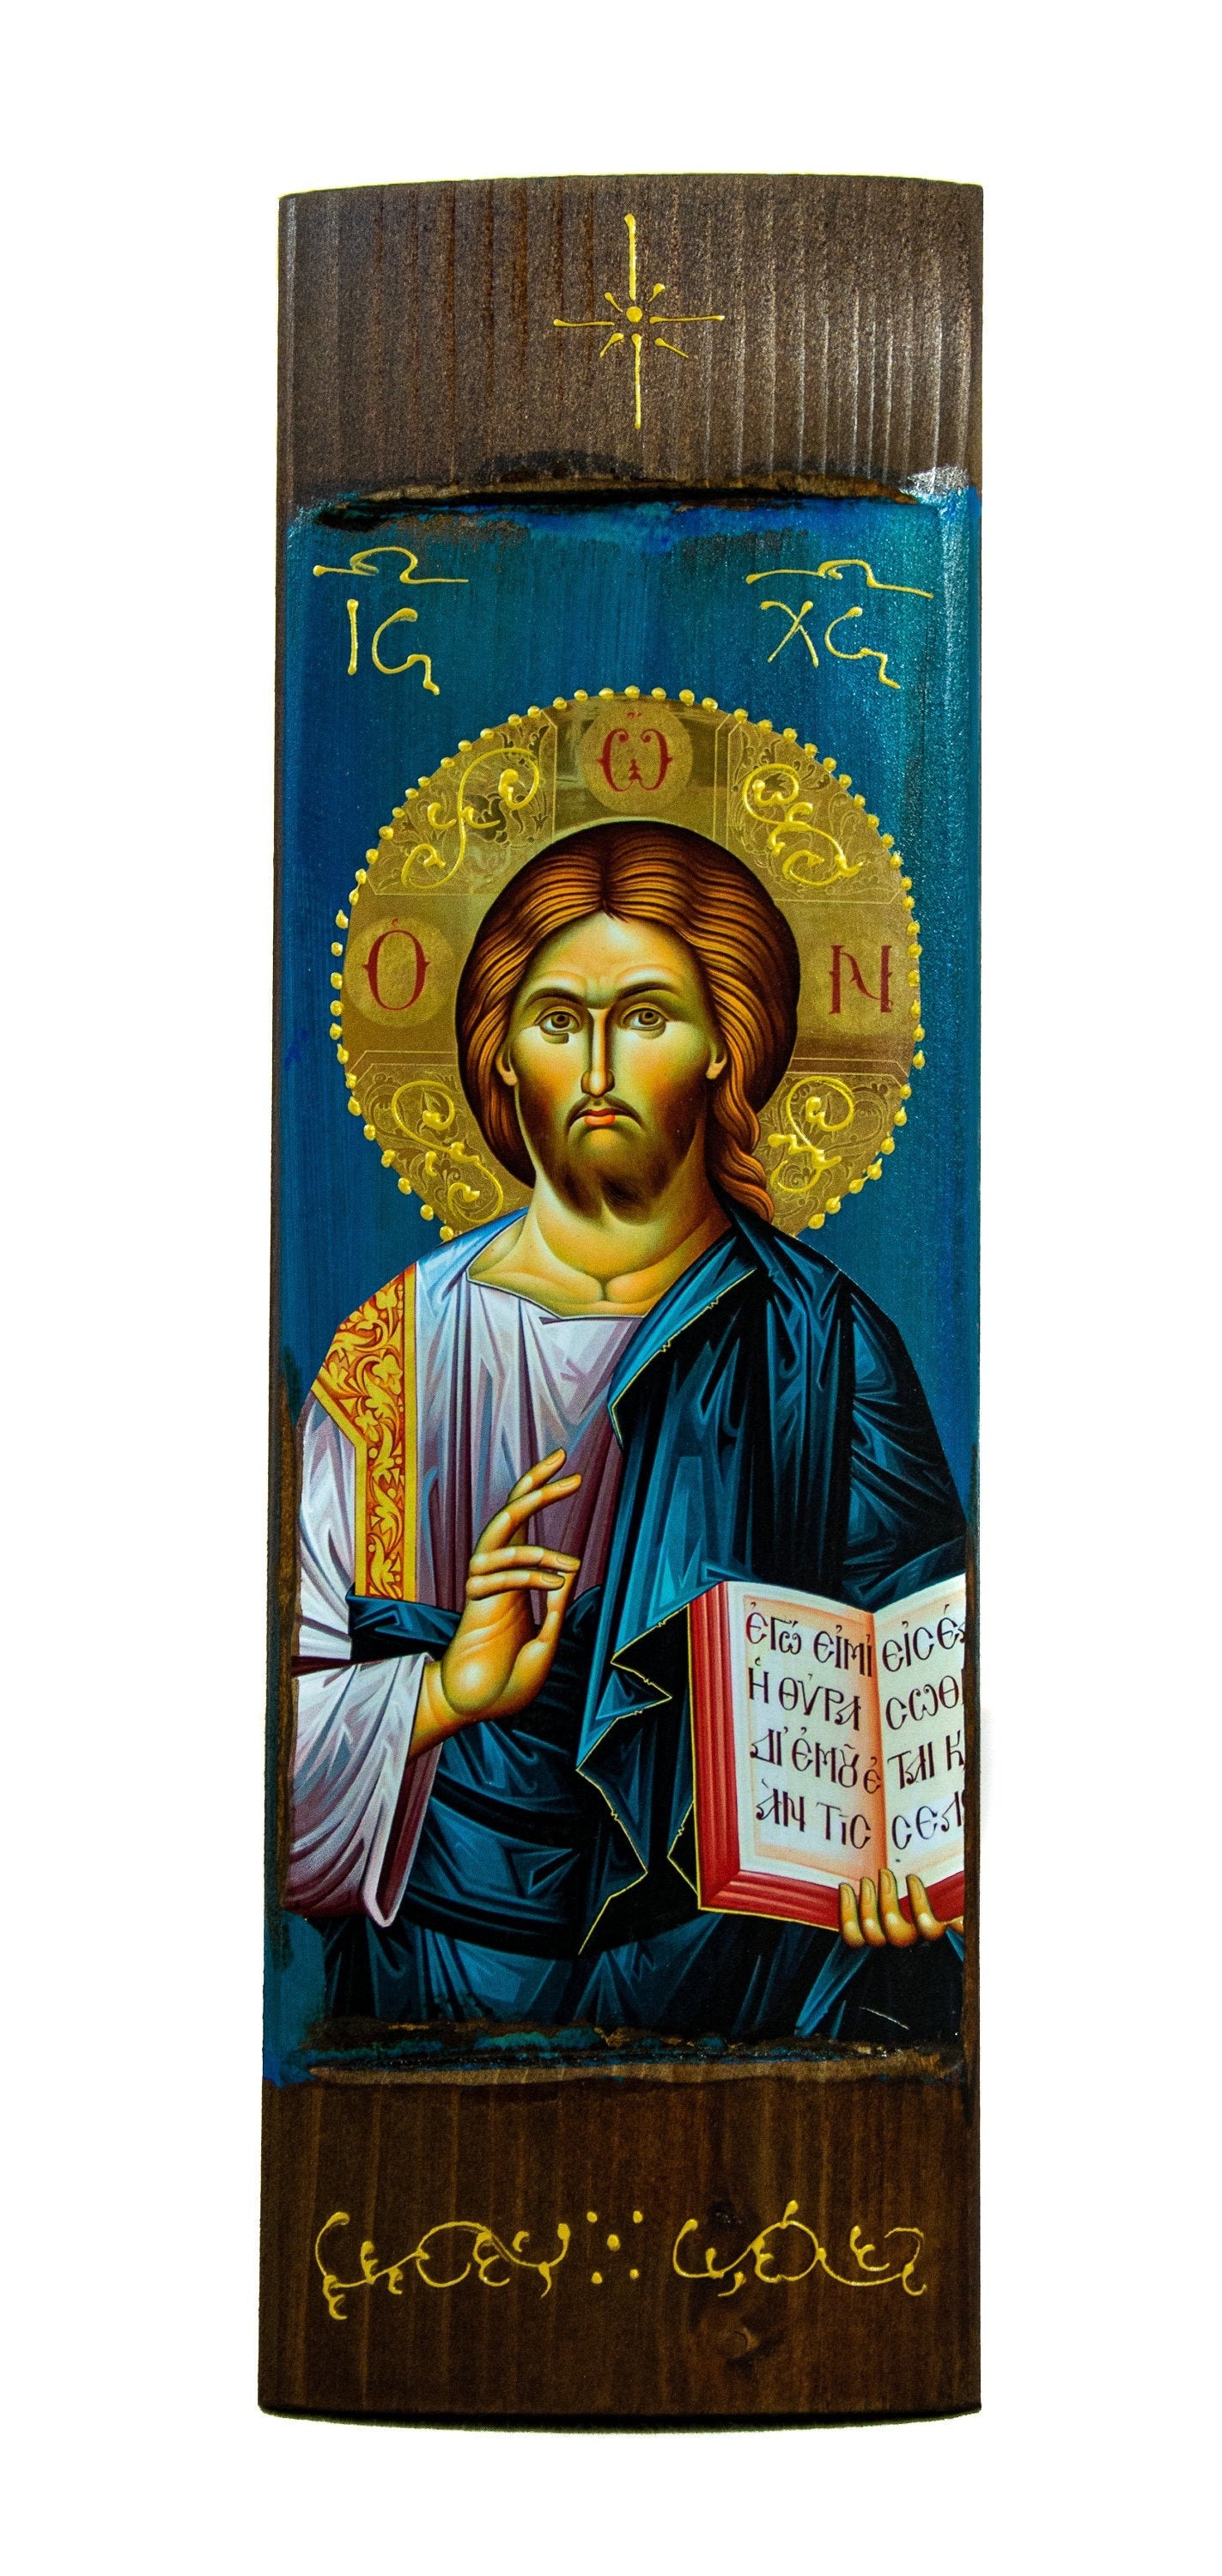 Jesus Christ icon, Handmade Greek Orthodox Icon of Our Lord Blessing, Byzantine art wall hanging wood plaque icon, religious decor TheHolyArt